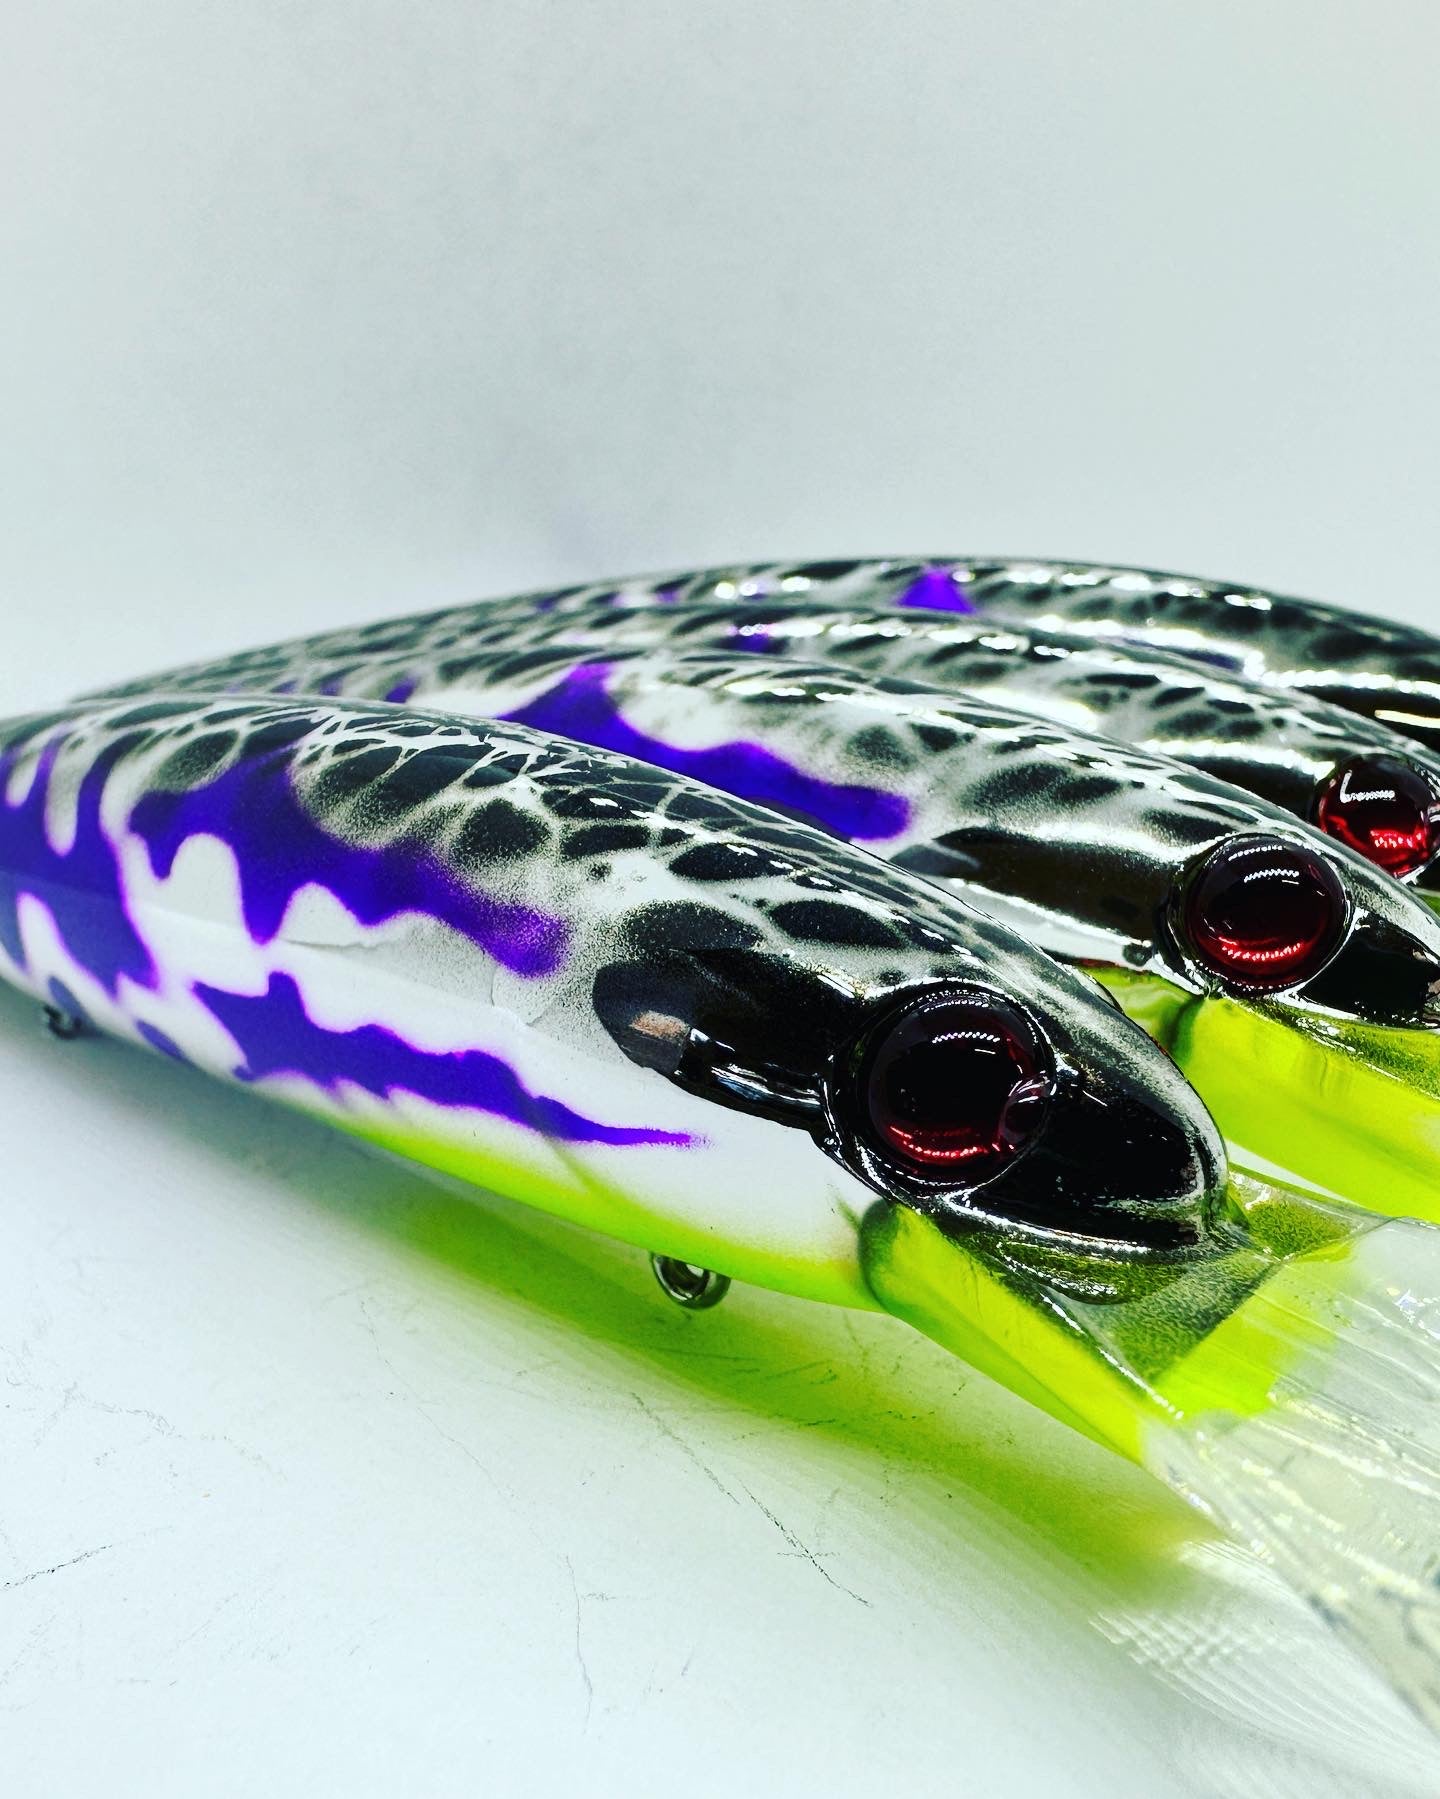 Custom Bandit Crankbait - Walleye Candy by Vertical Jigs and Lures